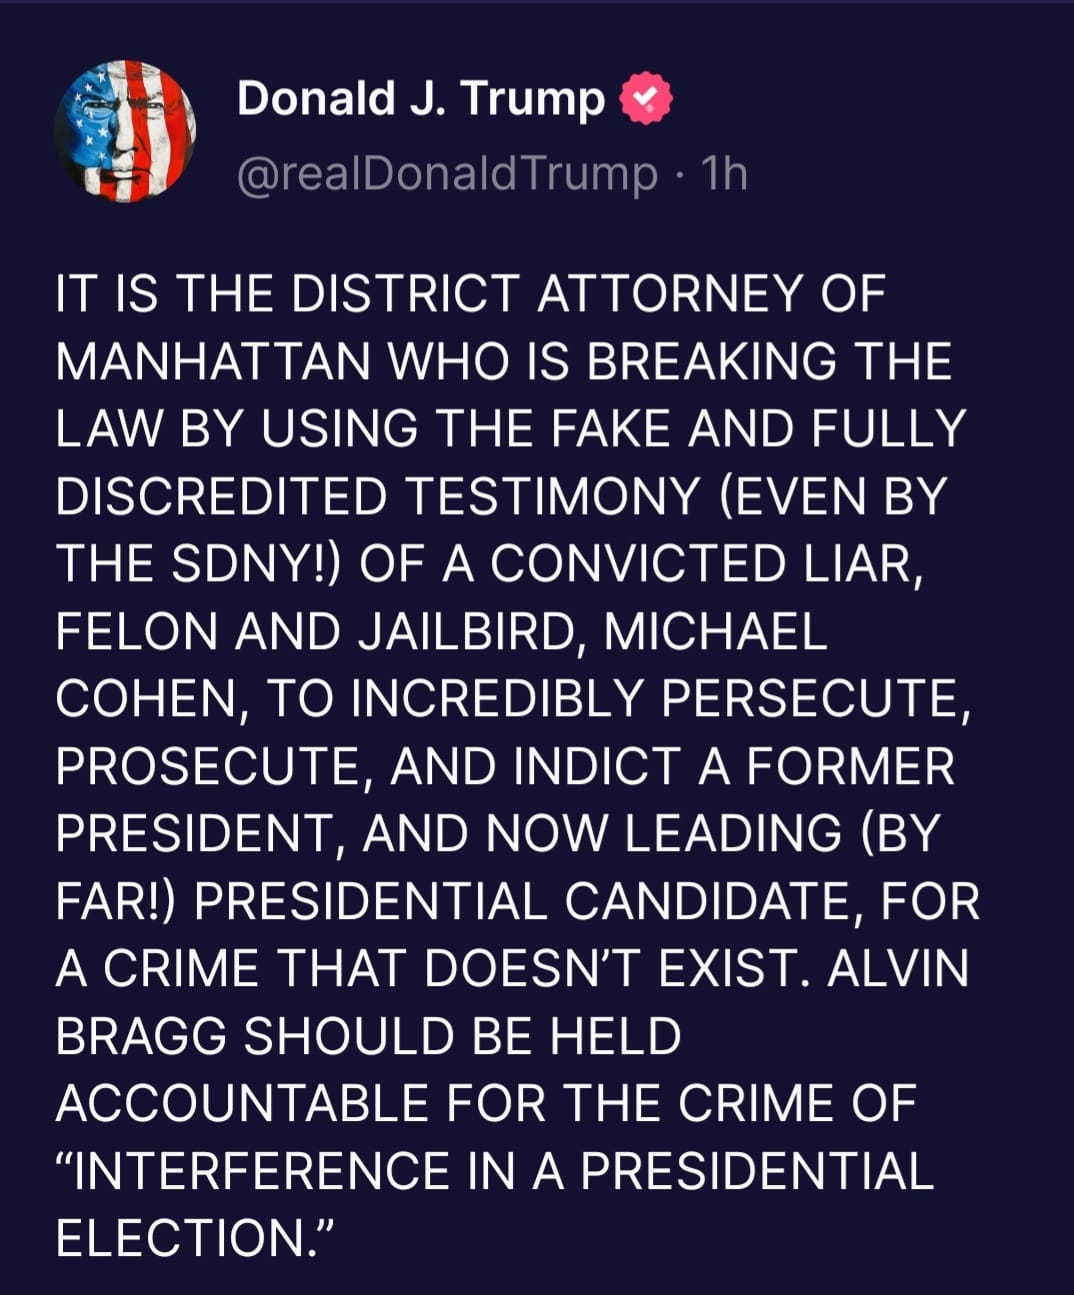 May be an image of one or more people and text that says 'Donald J. Trump @realDonaldTrump 1h IT IS THE DISTRICT ATTORNEY OF MANHATTAN WHO IS BREAKING THE LAW BY USING THE FAKE AND FULLY DISCREDITED TESTIMONY (EVEN BY THE SDNY!) OF A CONVICTED LIAR, FELON AND JAILBIRD, MICHAEL COHEN, TO INCREDIBLY PERSECUTE, PROSECUTE, AND INDICT A FORMER PRESIDENT, AND NOW LEADING (BY FAR!) PRESIDENTIAL CANDIDATE, FOR A CRIME THAT DOESN'T EXIST. ALVIN BRAGG SHOULD BE HELD ACCOUNTABLE FOR THE CRIME OF "INTERFERENCE IN A PRESIDENTIAL ELECTION."'